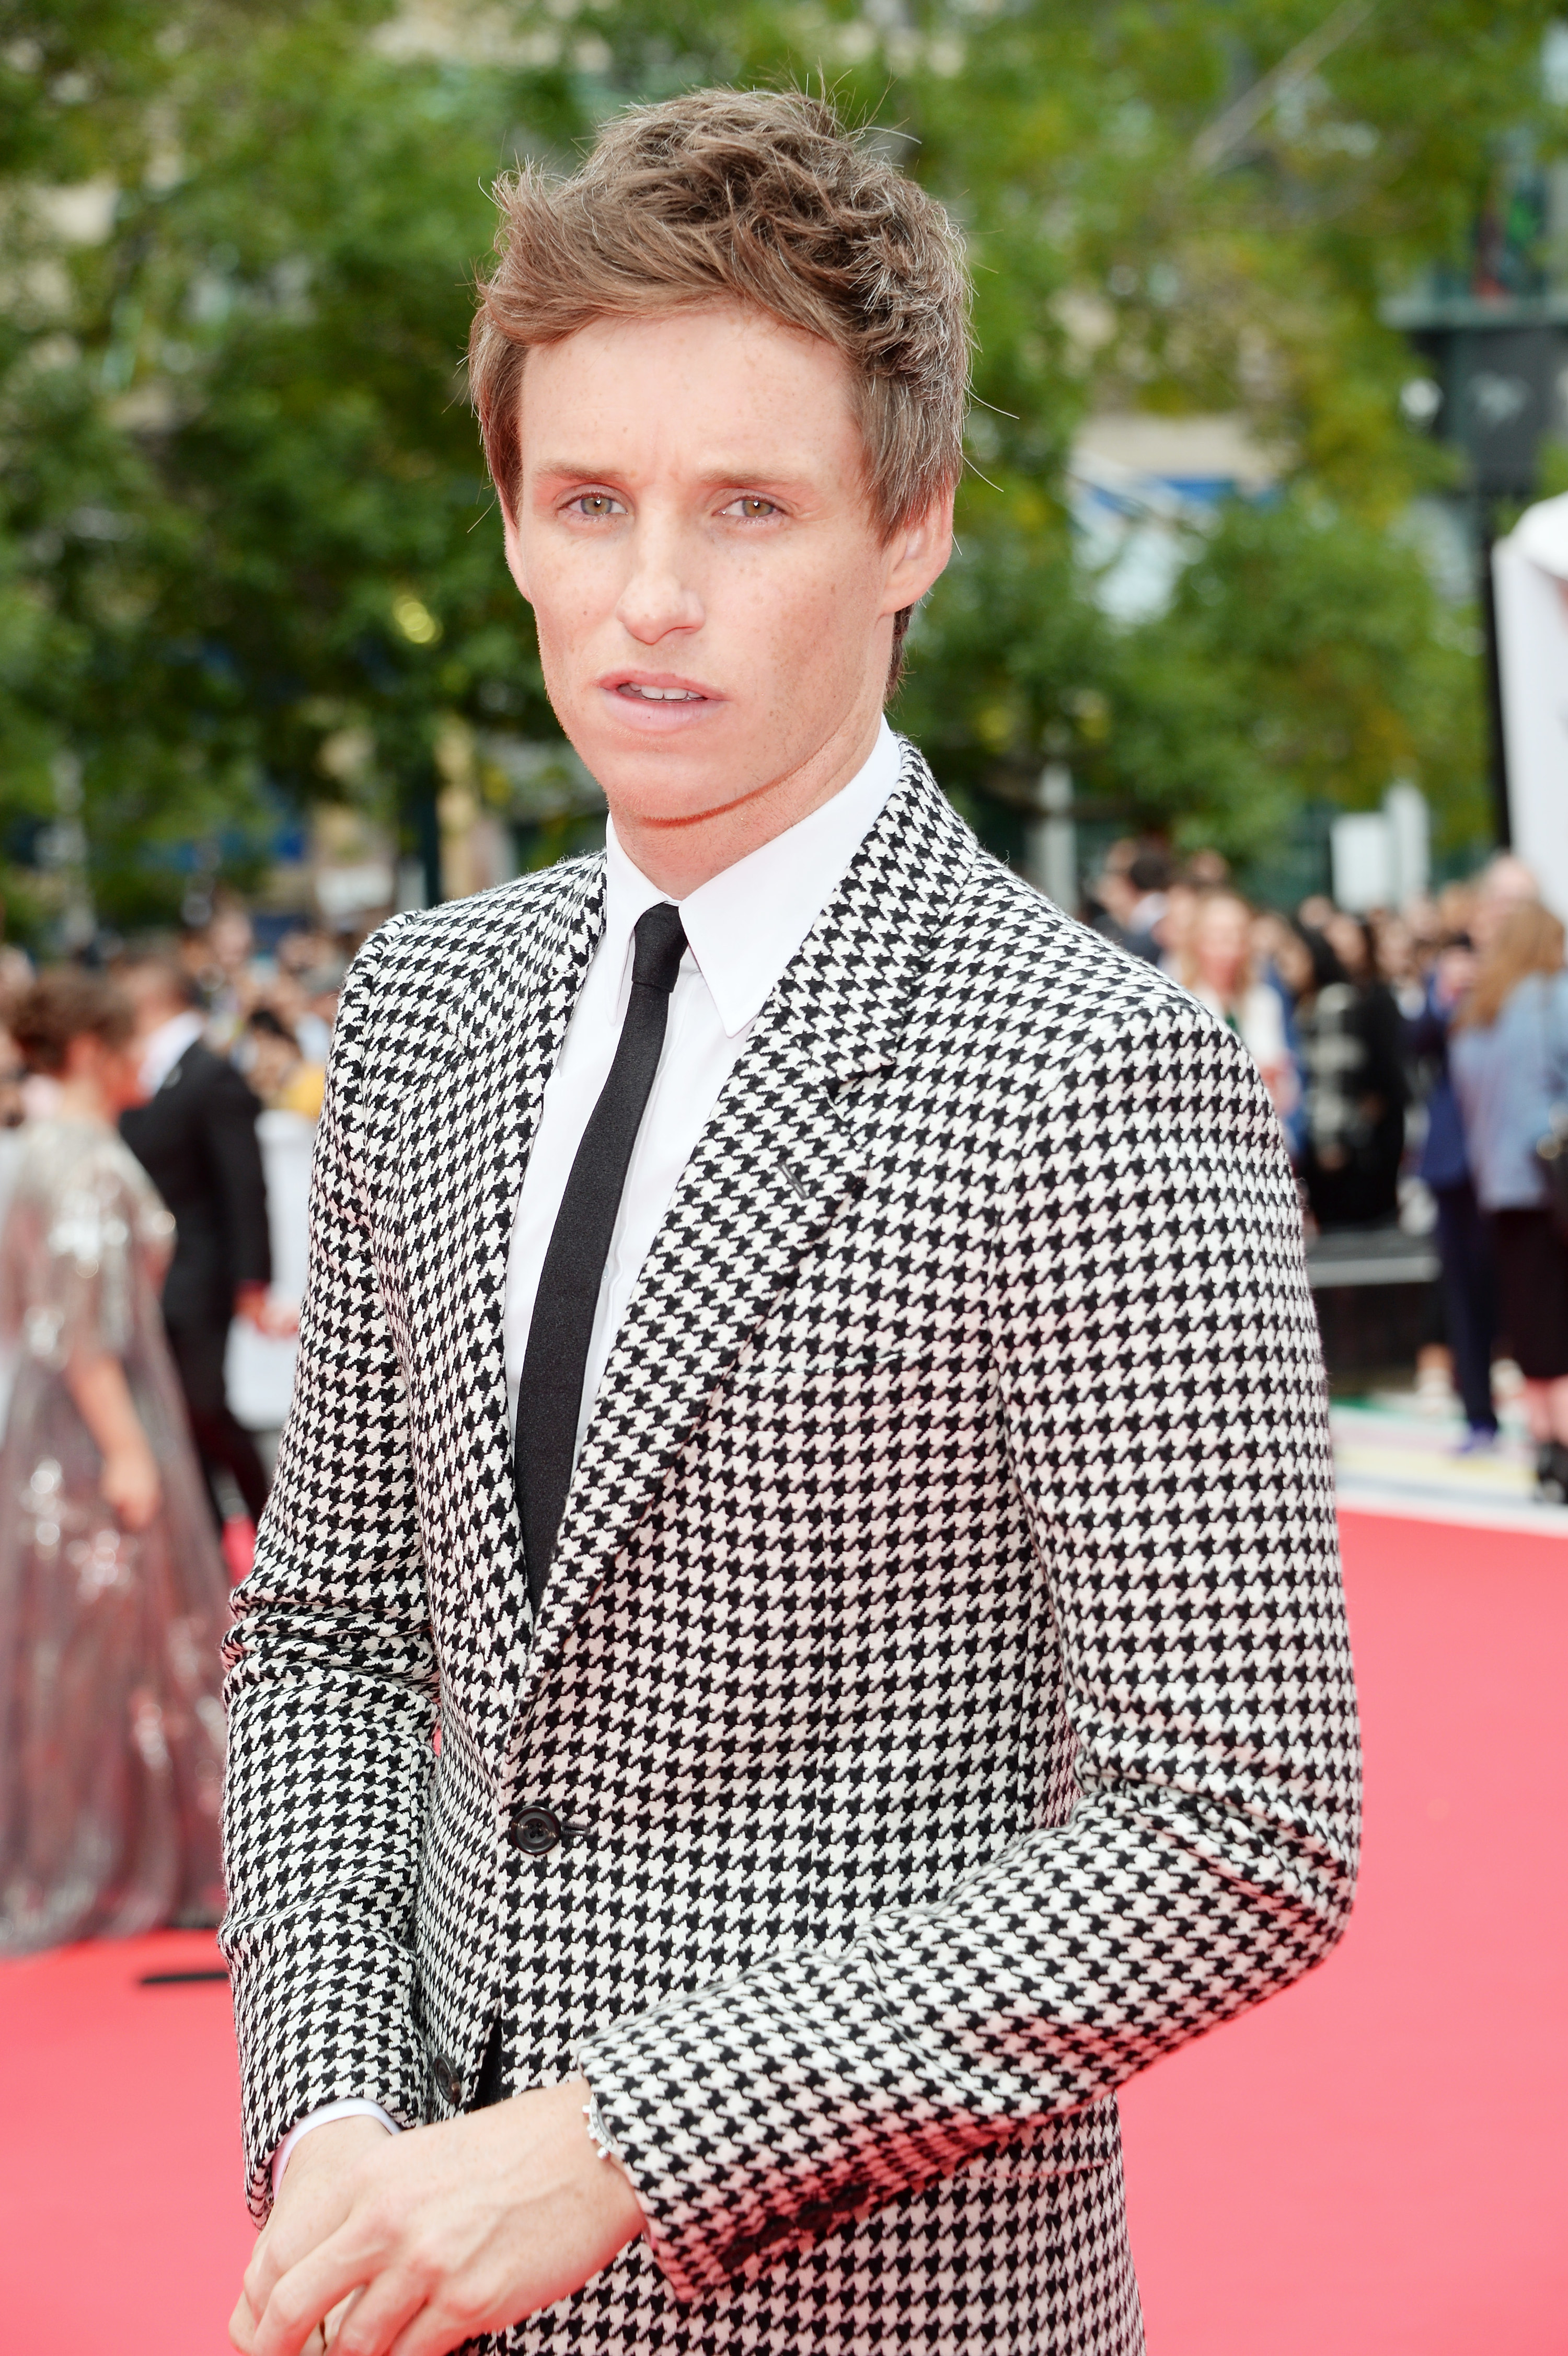 Eddie at a red carpet event in a houndstooth suit